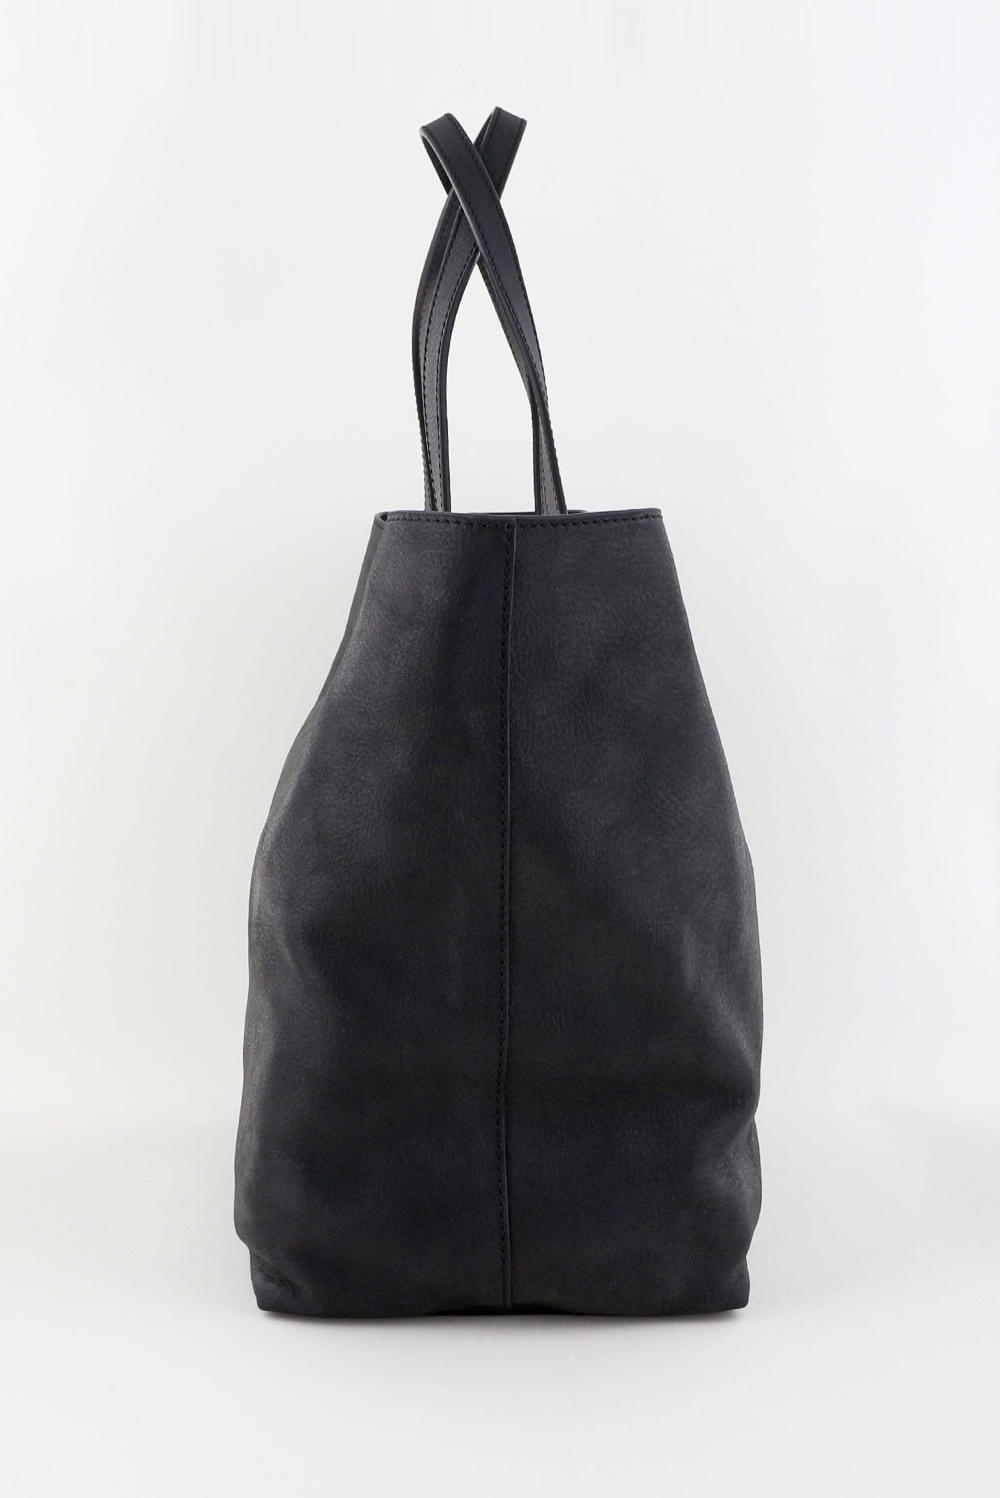 Golden Goose - Tote bag for Woman - Black - GWA00227A000308-90100